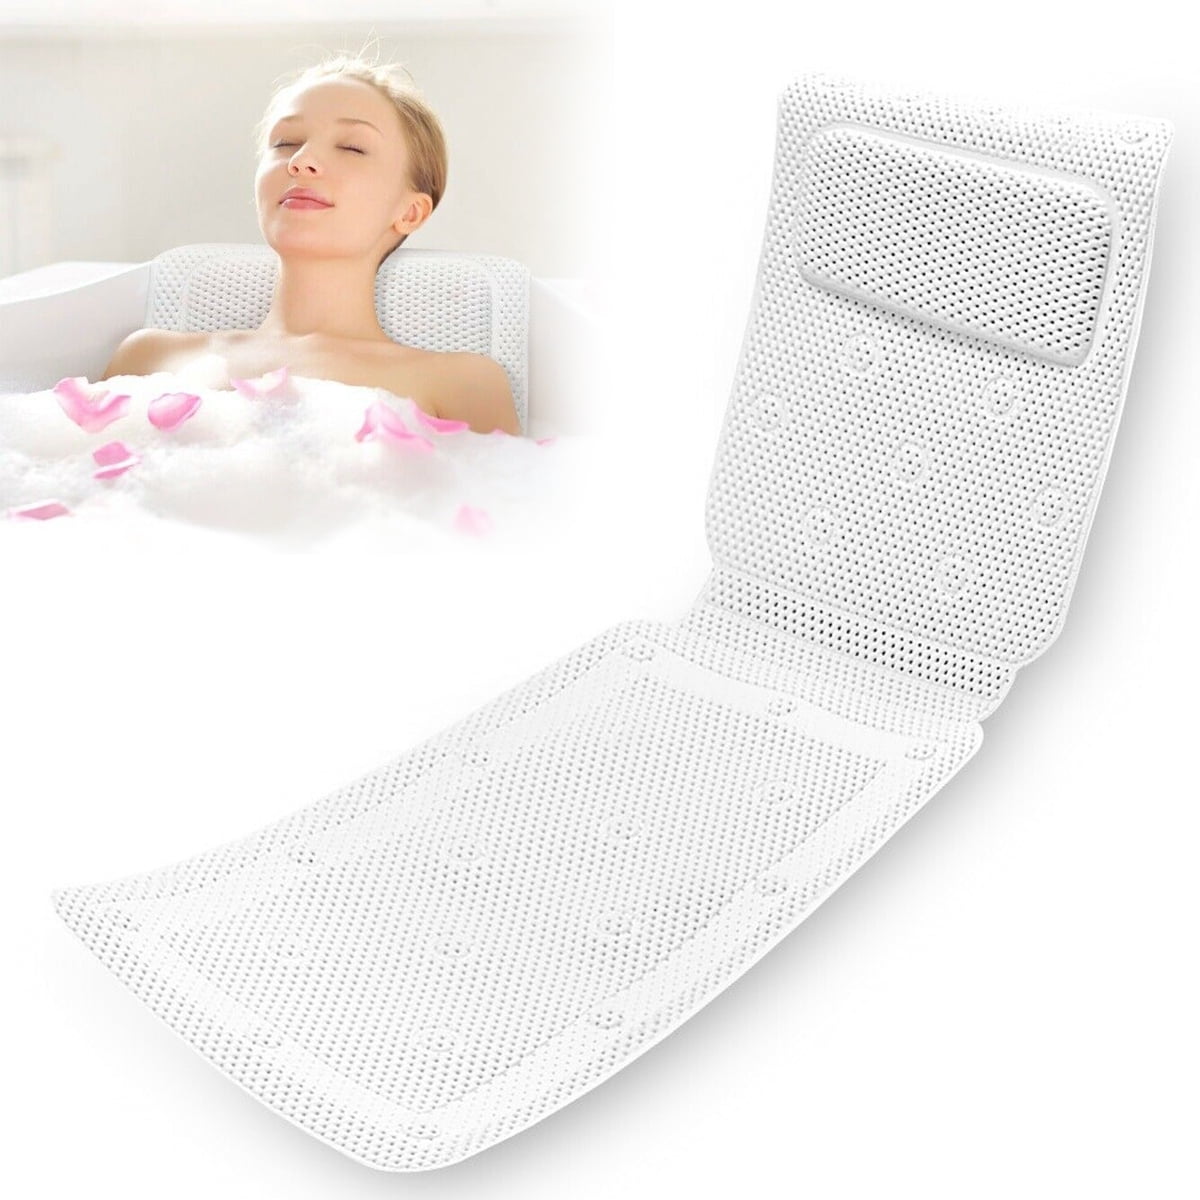 Kowaku Full Body Bath Pillow Mat Non-Slip Luxury Spa Bath CushionBath Pillows for Tub Neck and Back Support, Large Suction Cups Comfort Head Rest,Breathable